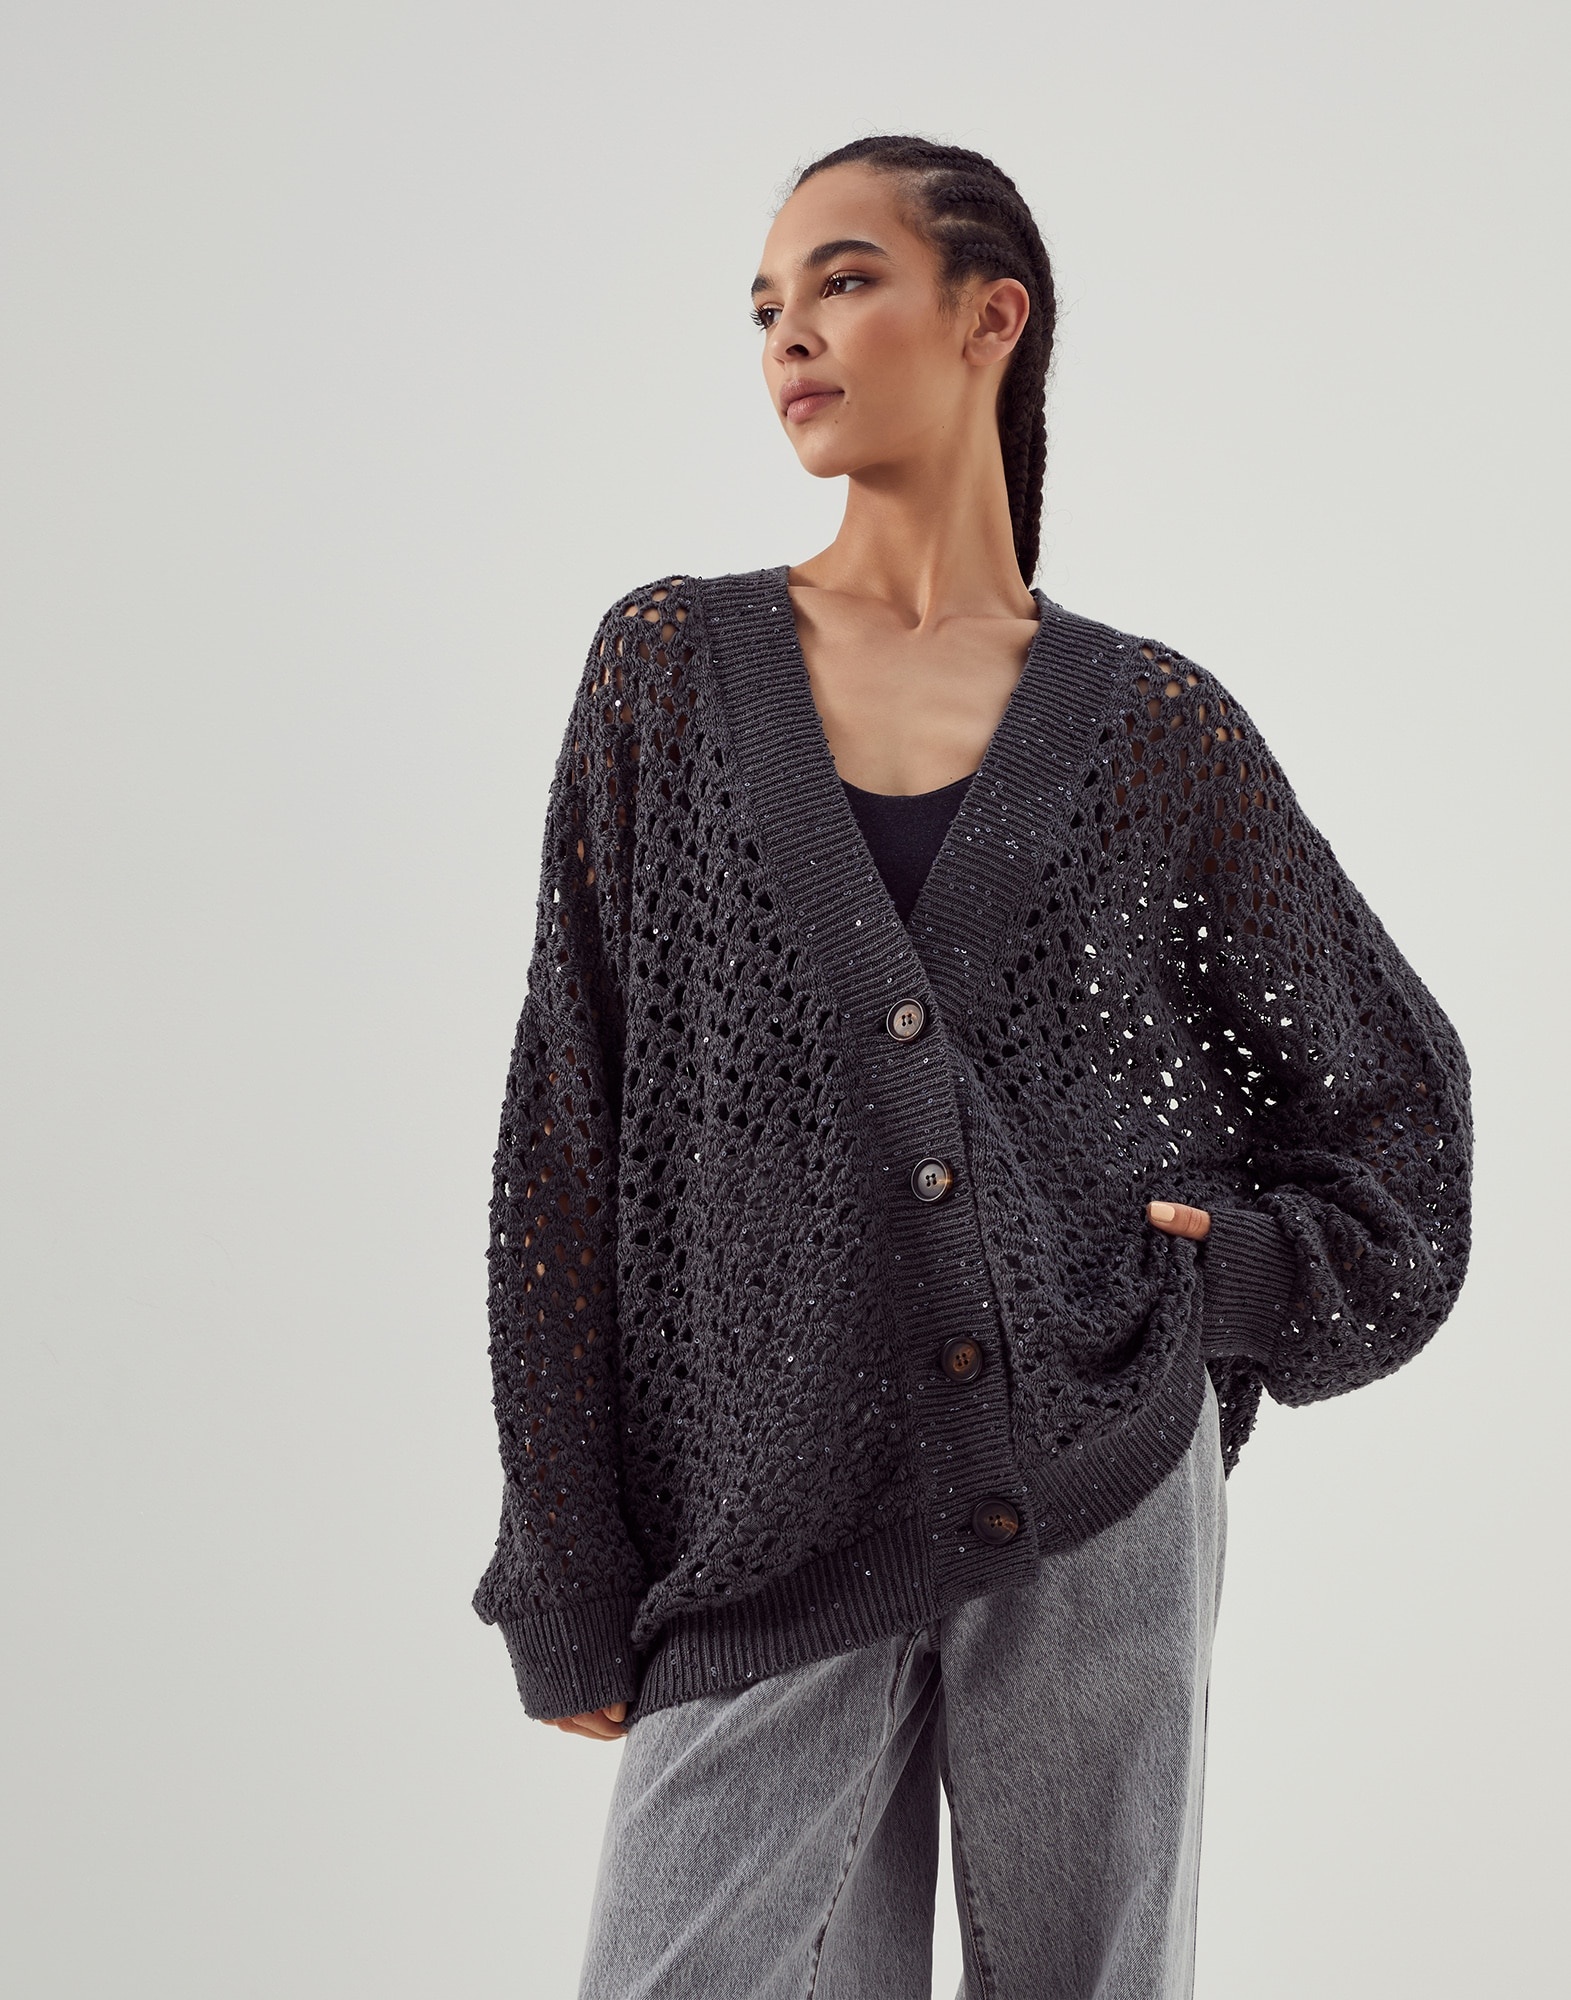 Dazzling Net cardigan in cotton, linen and silk - 1